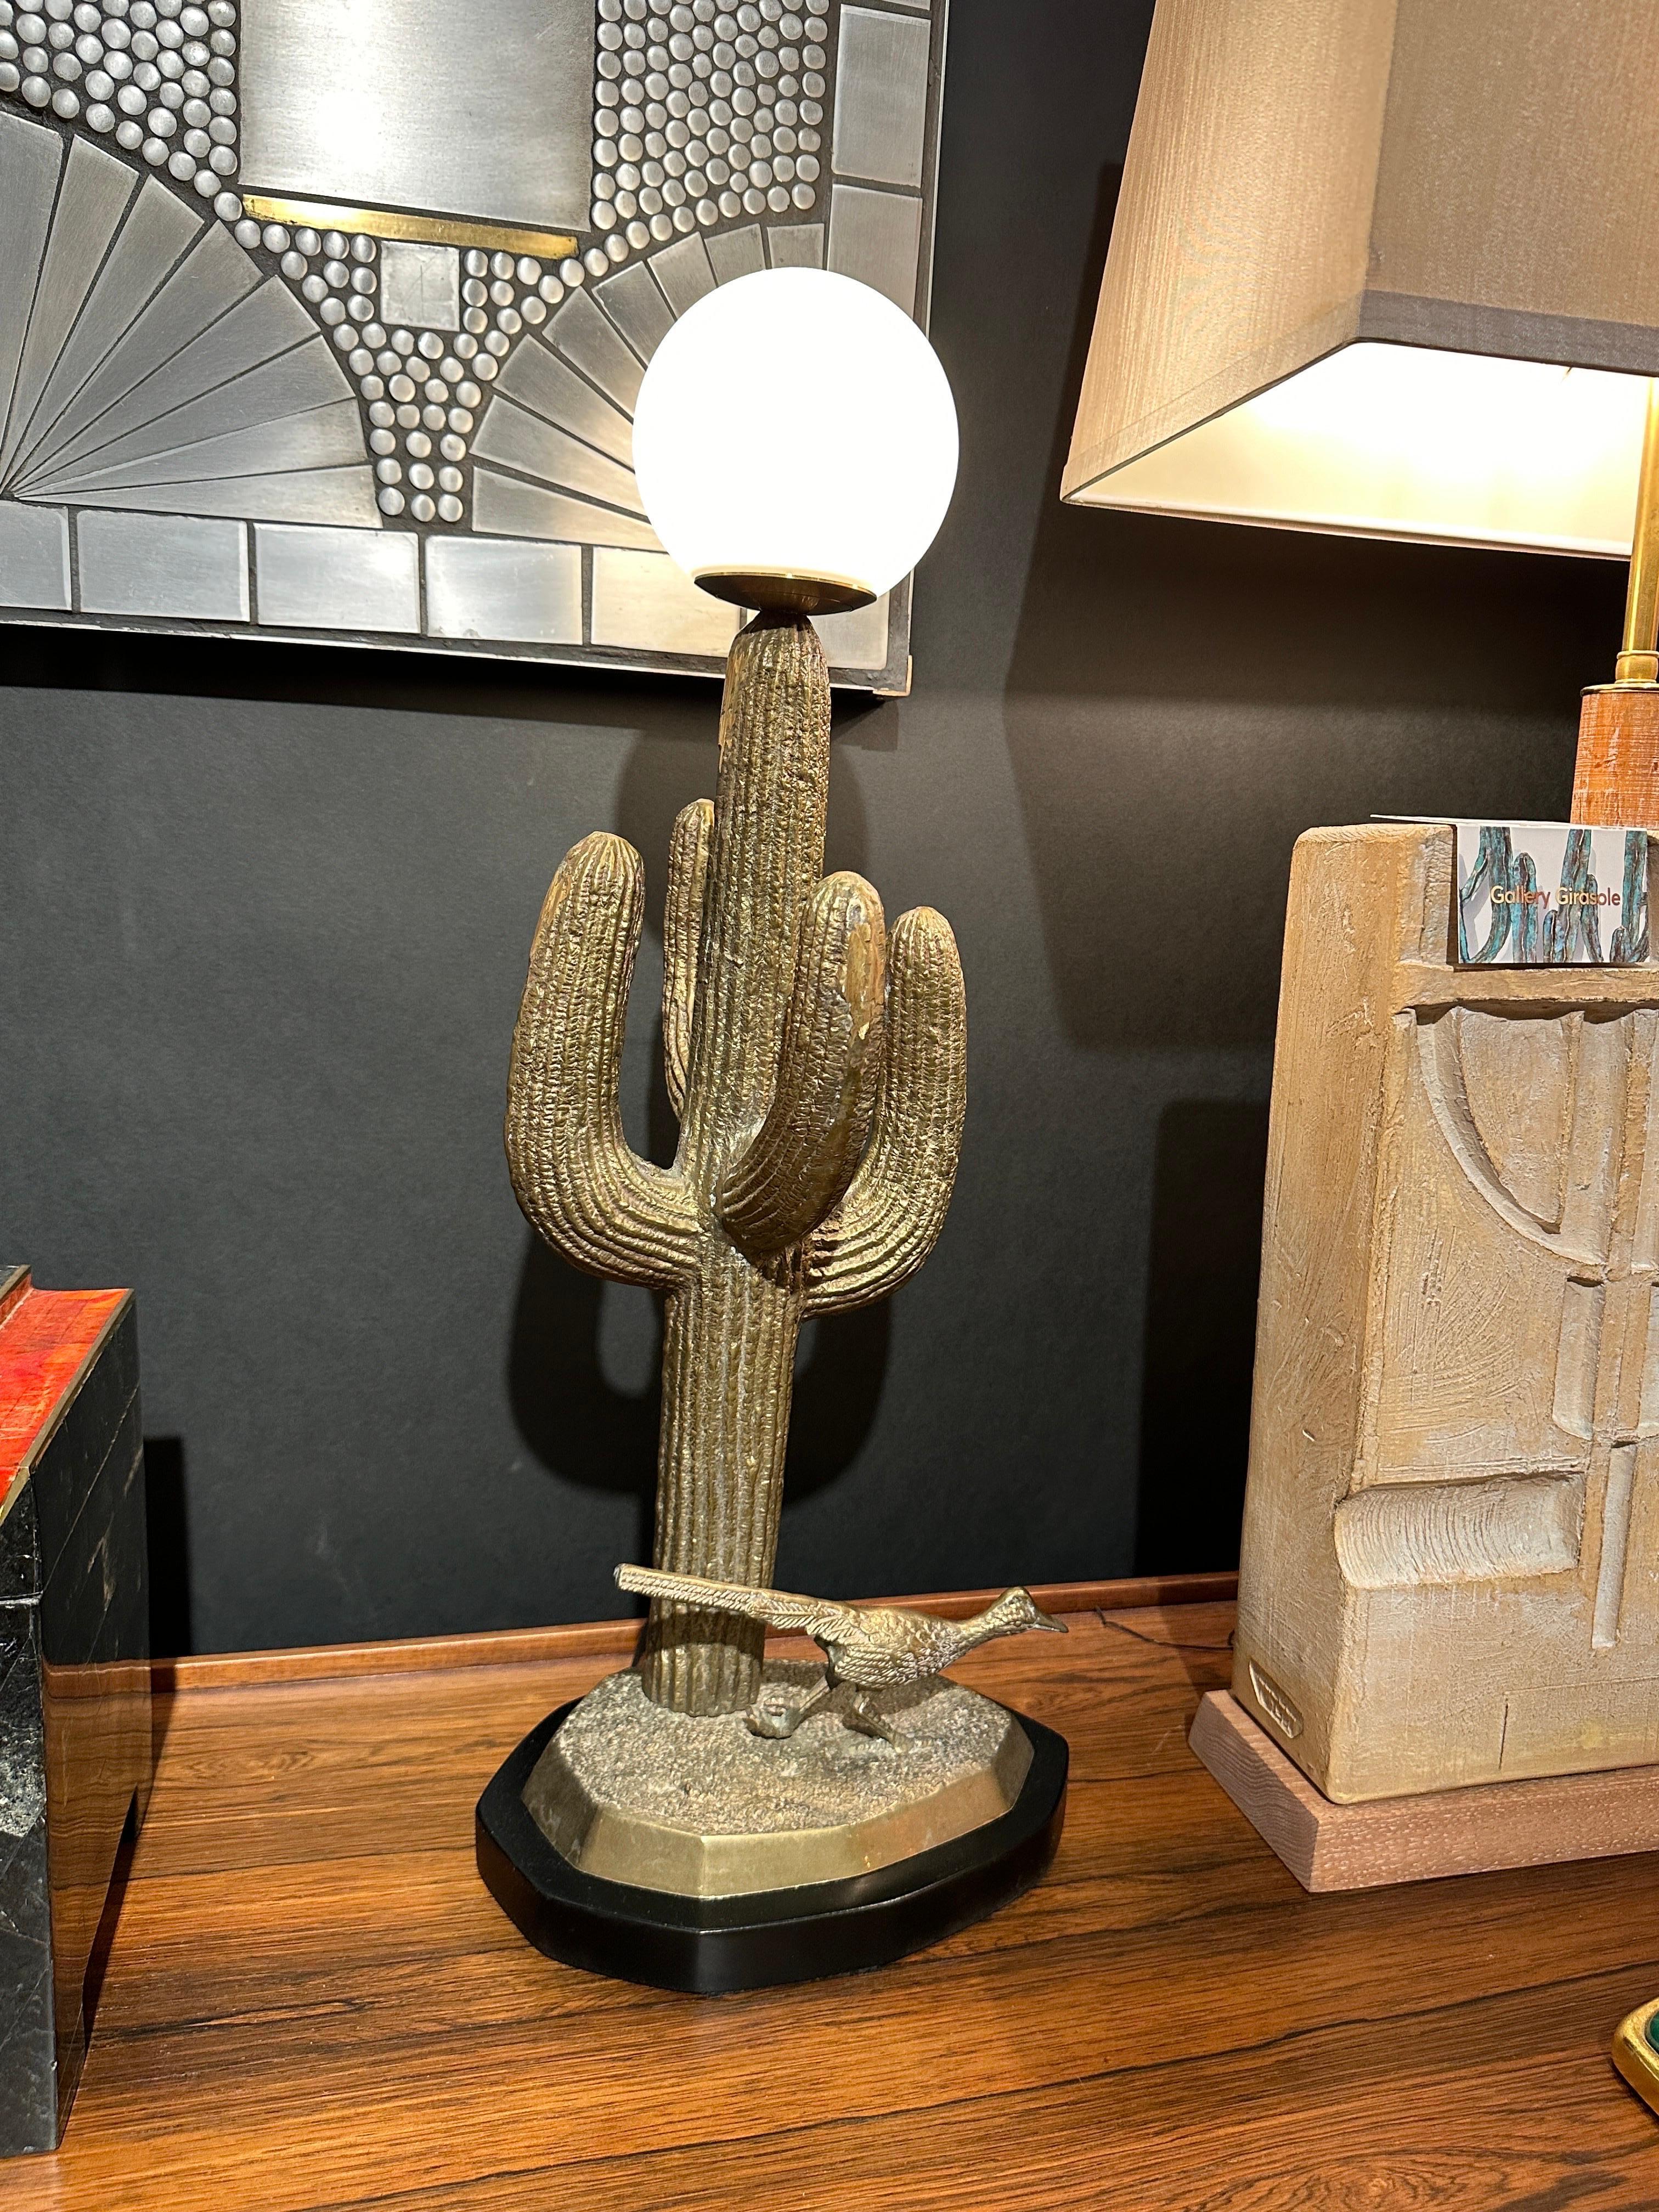 Small brass saguaro cactus and roadrunner sculpture from 1970’s mounted as a lamp. Only cactus is 20